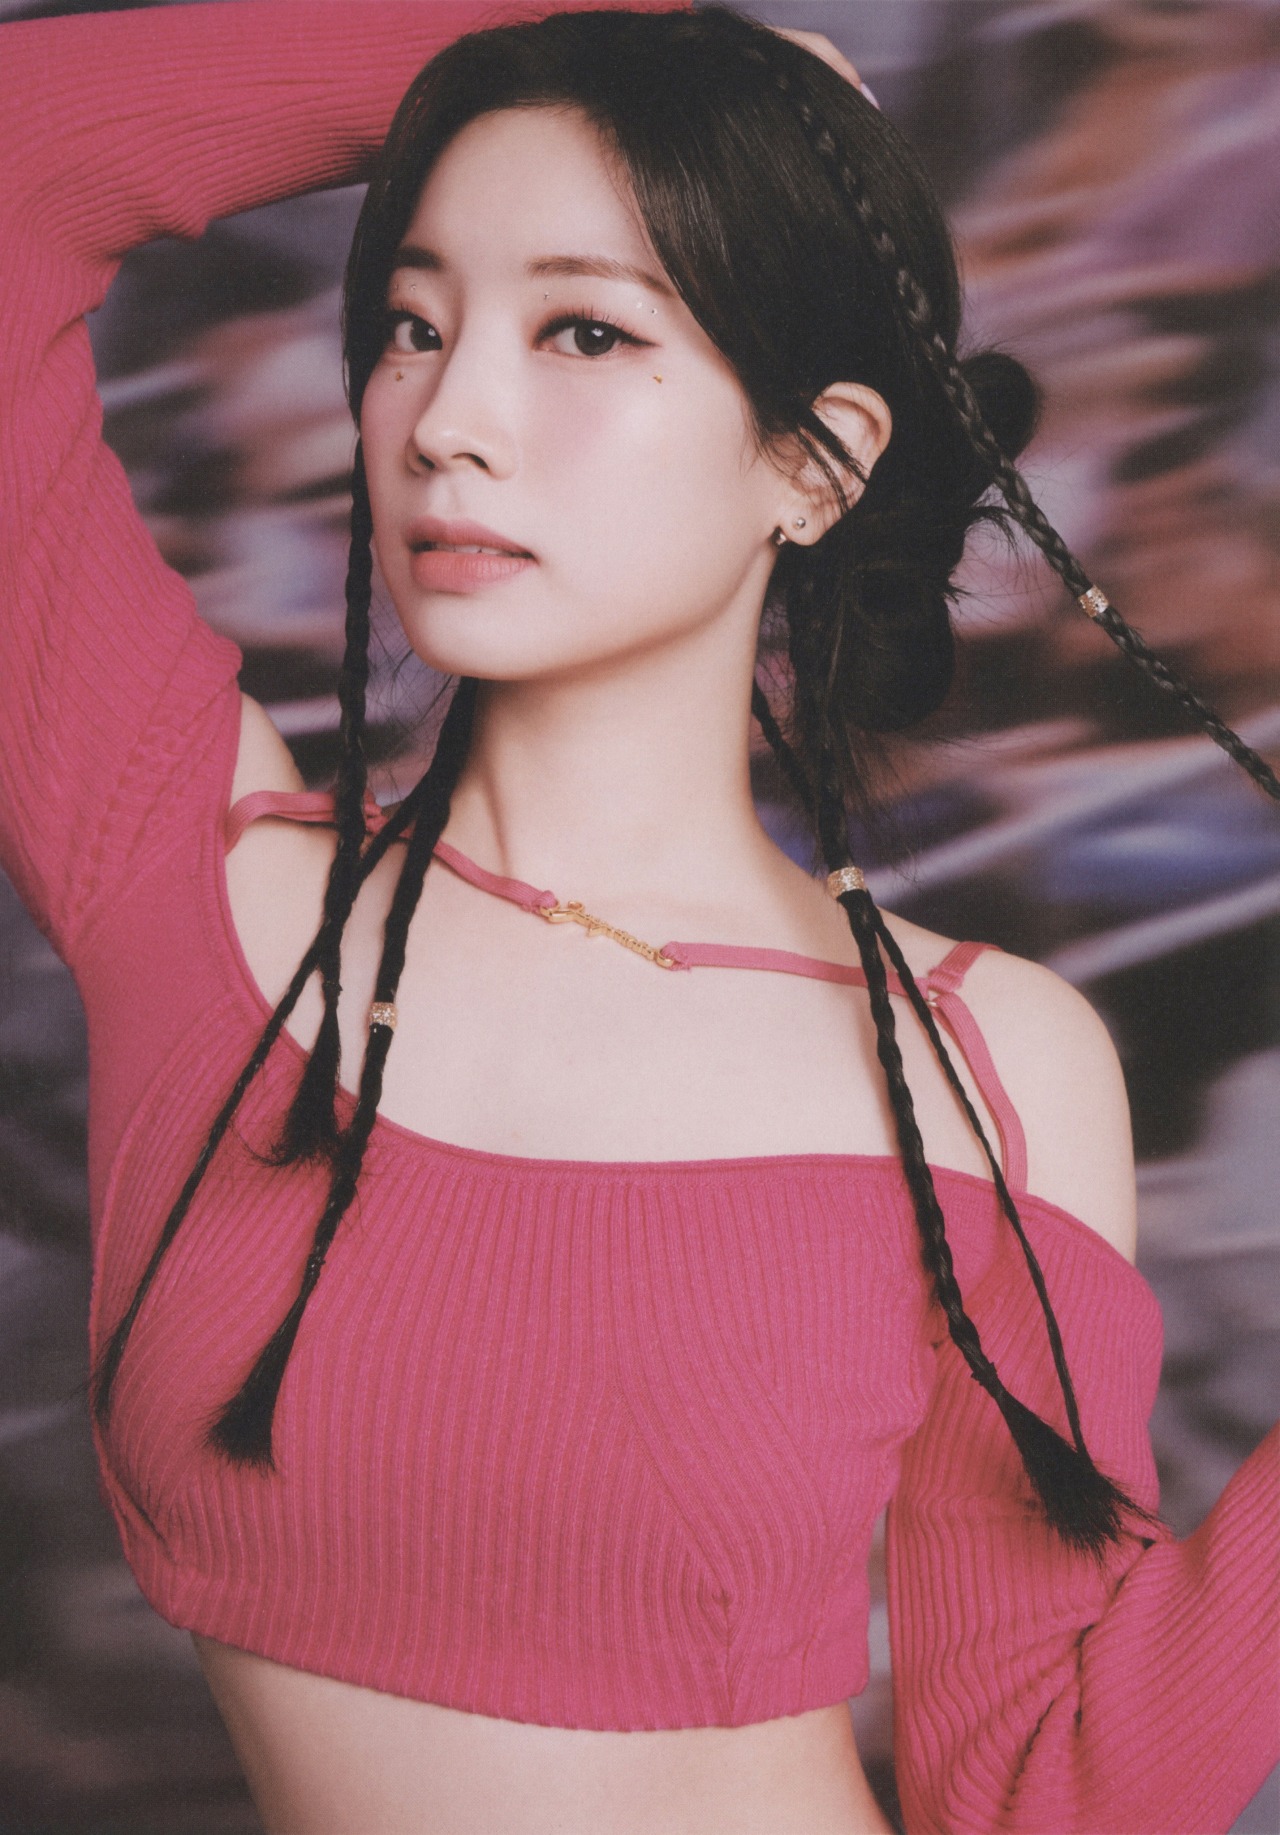 twicesonce: [SCAN] TWICE ‘READY TO BE’ Ready Ver. — DAHYUN (1,...